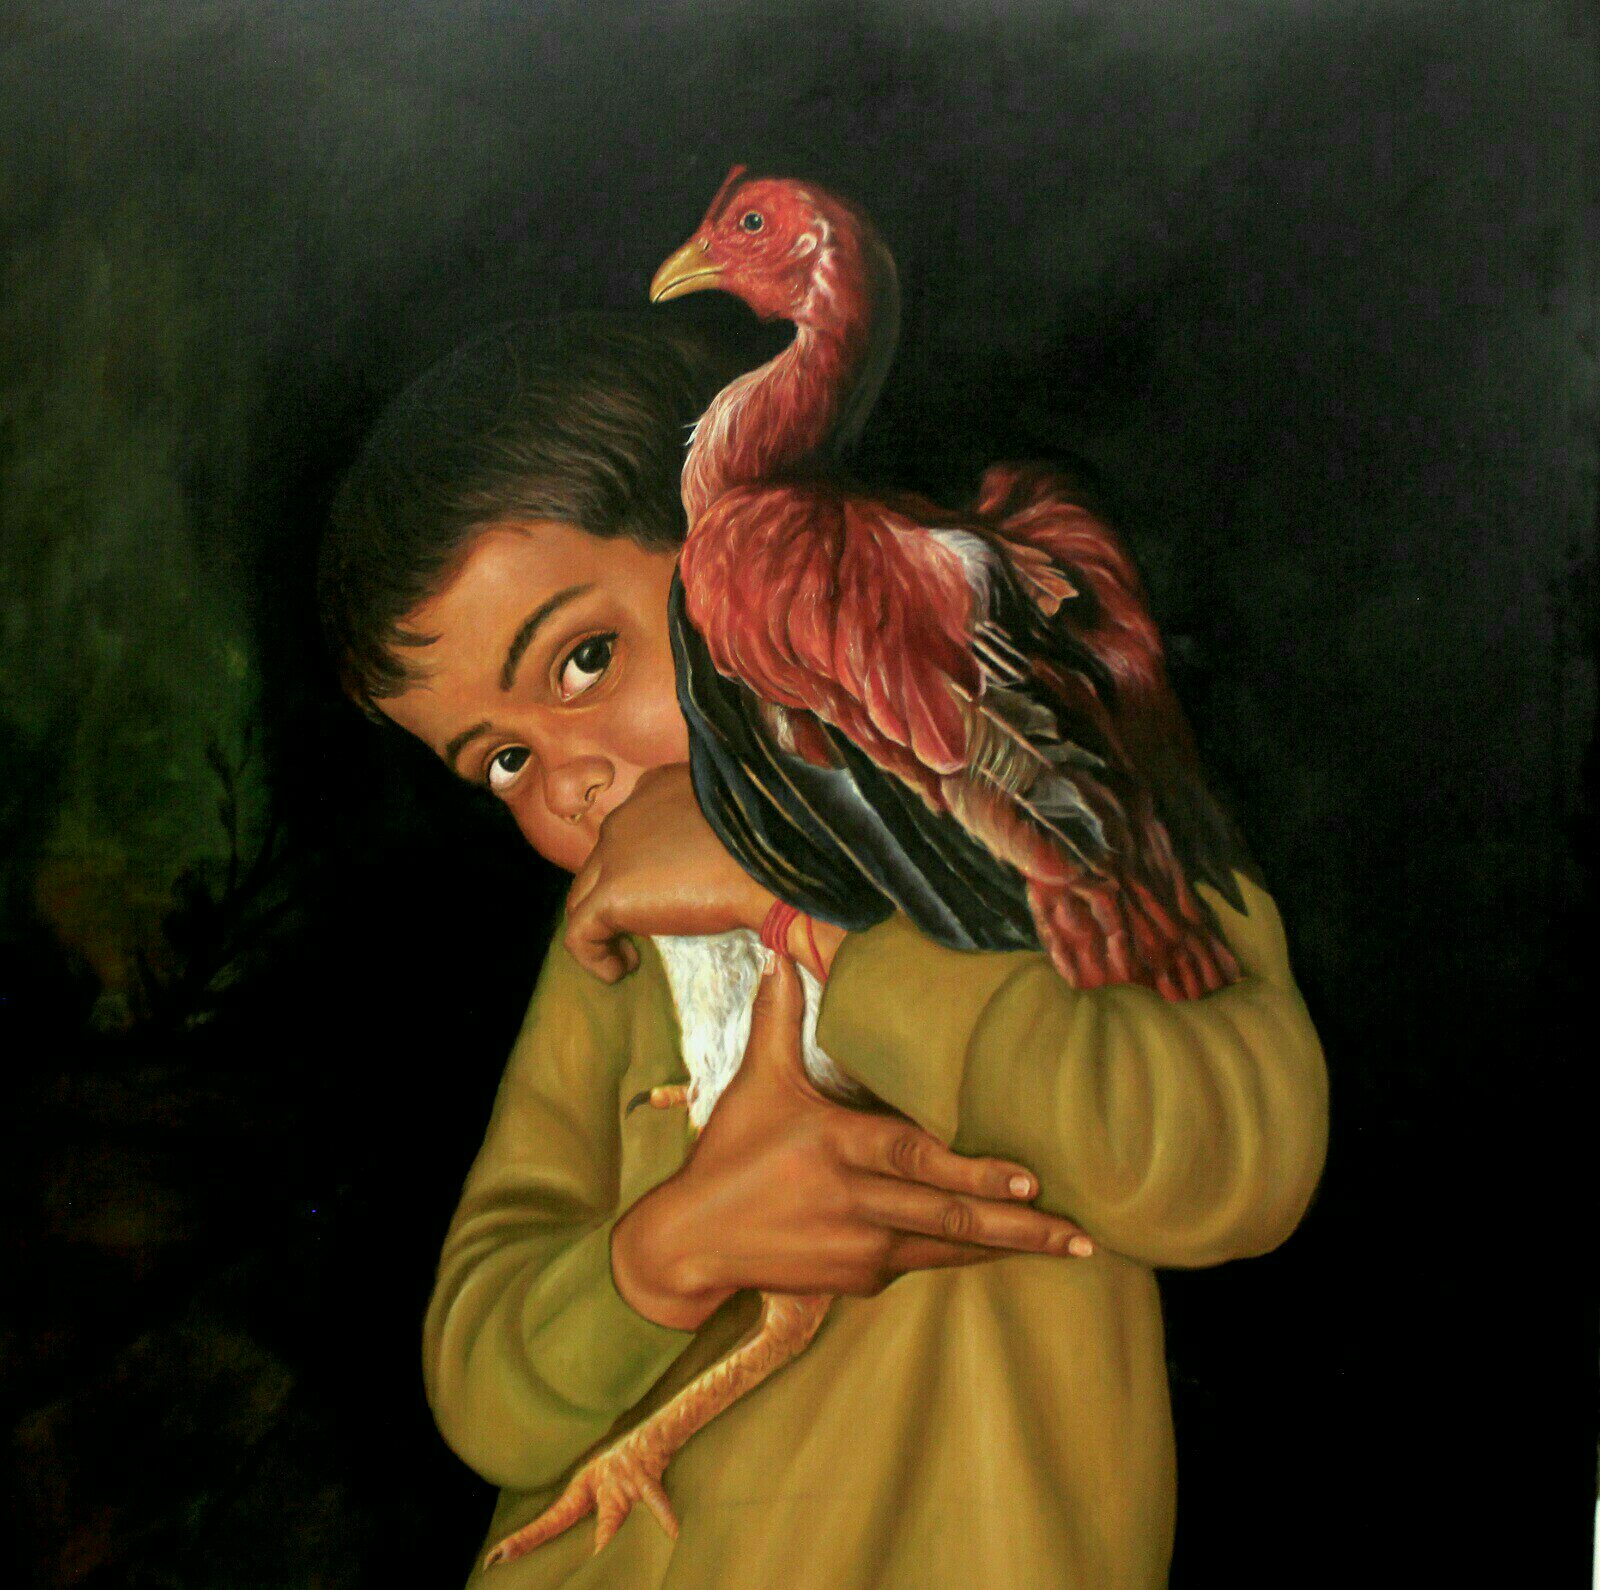 Medium: Oil on canvas <br> Size: 45 x45 inches